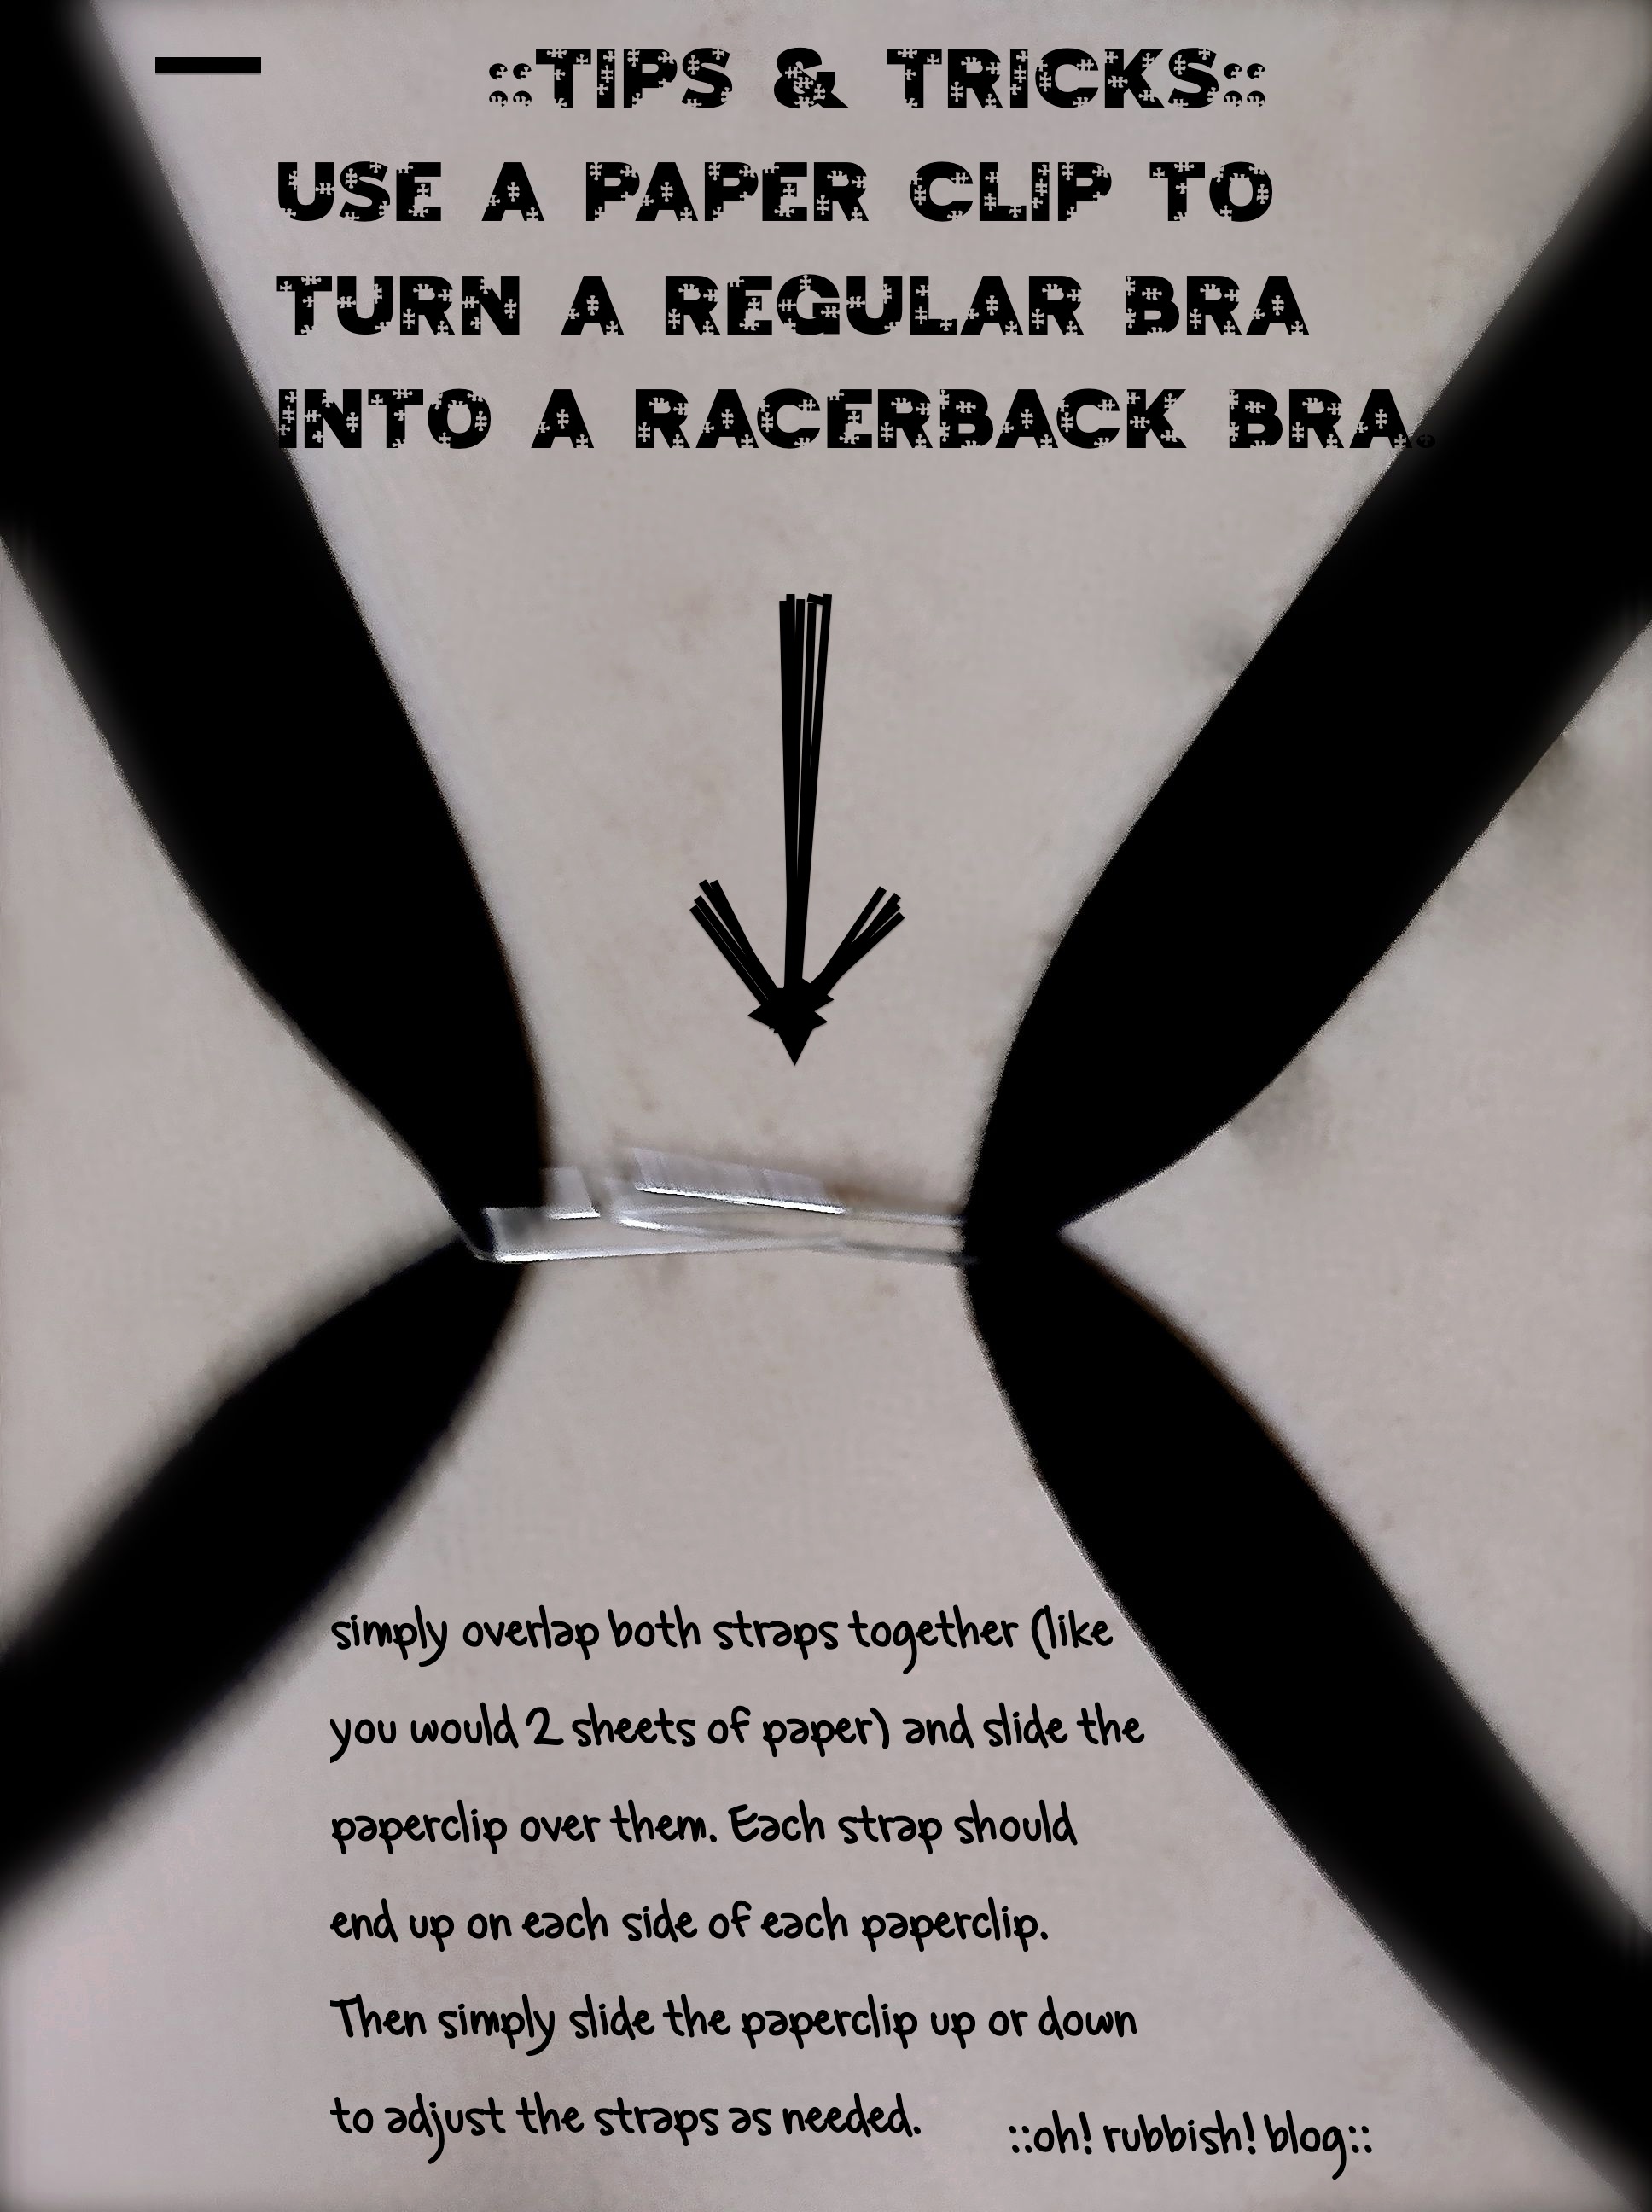 I converted a standard bra into a racerback bra! Posting this for